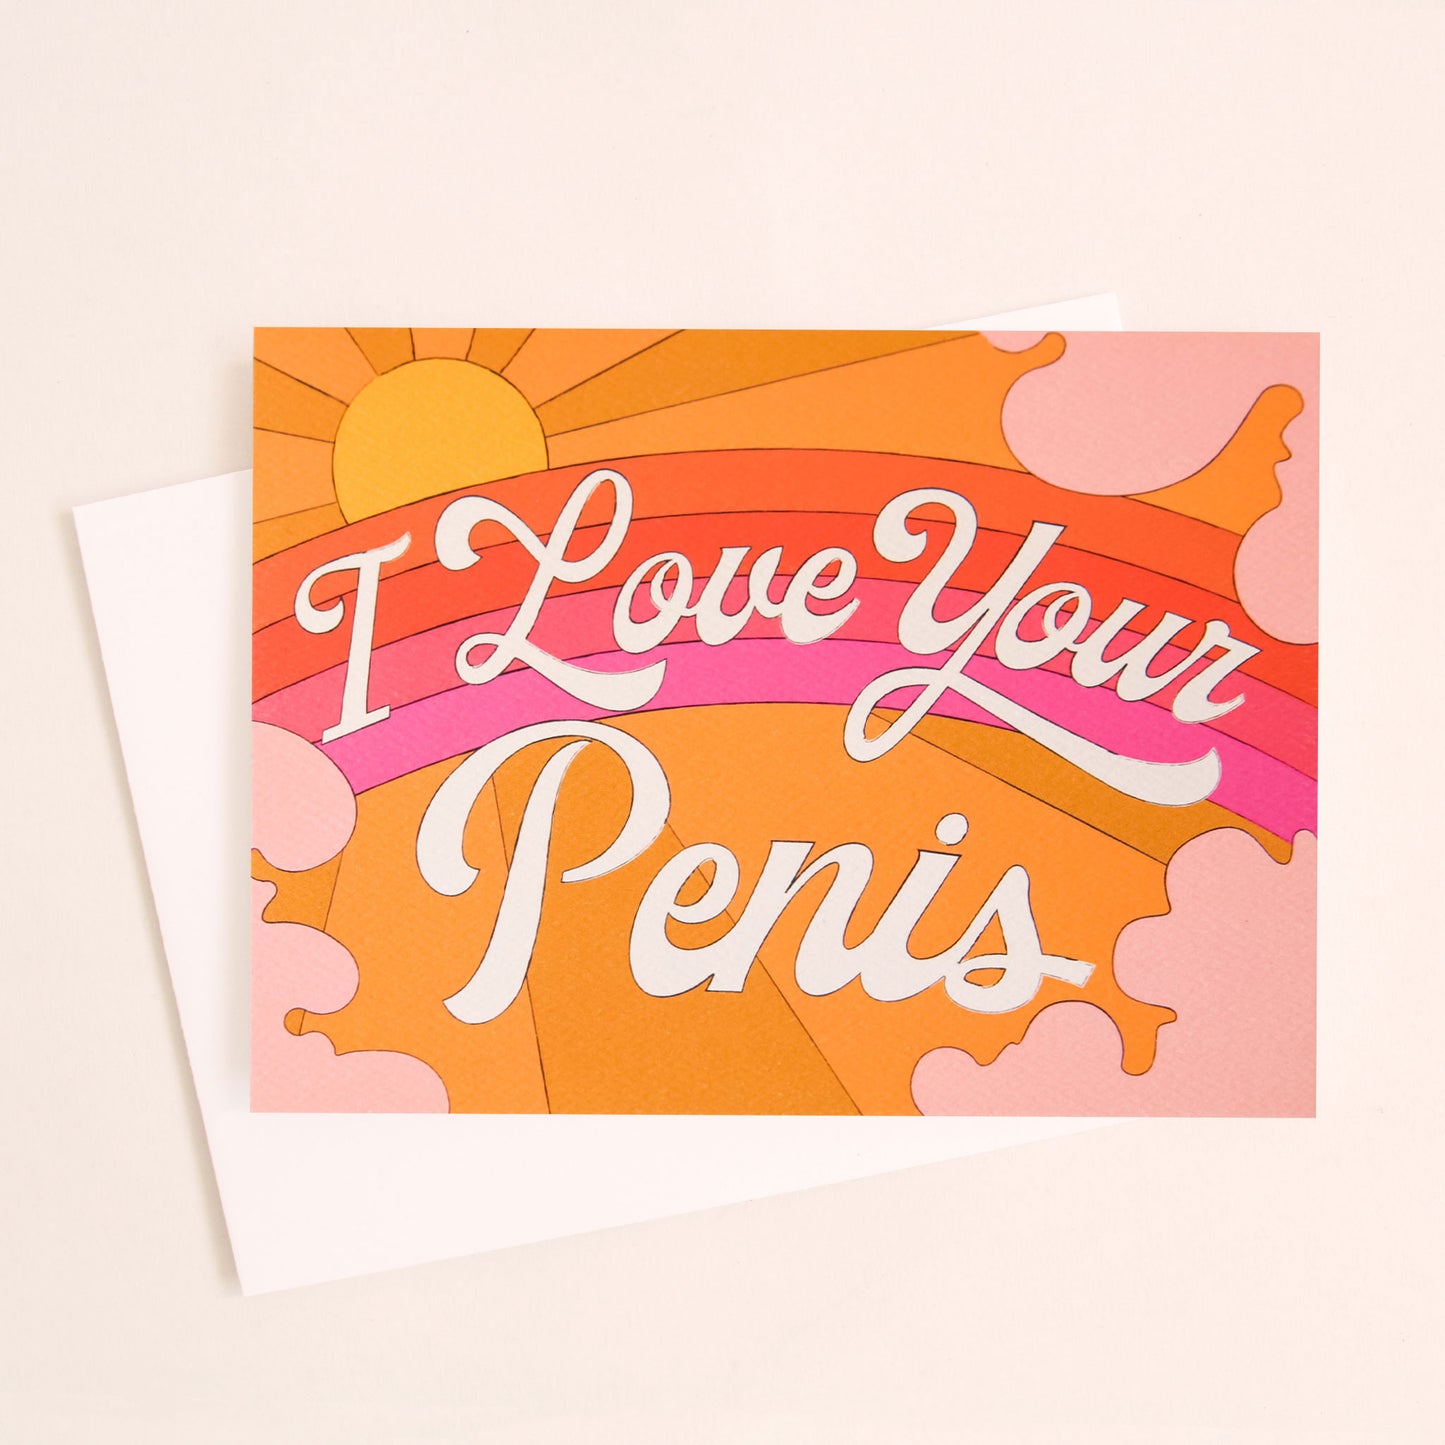 Card with a vibrant scene of a rosie toned rainbow and beaming yellow sun. Soft pink cloud take up the edges. The center of the card reads 'I love your penis' in white cursive lettering.